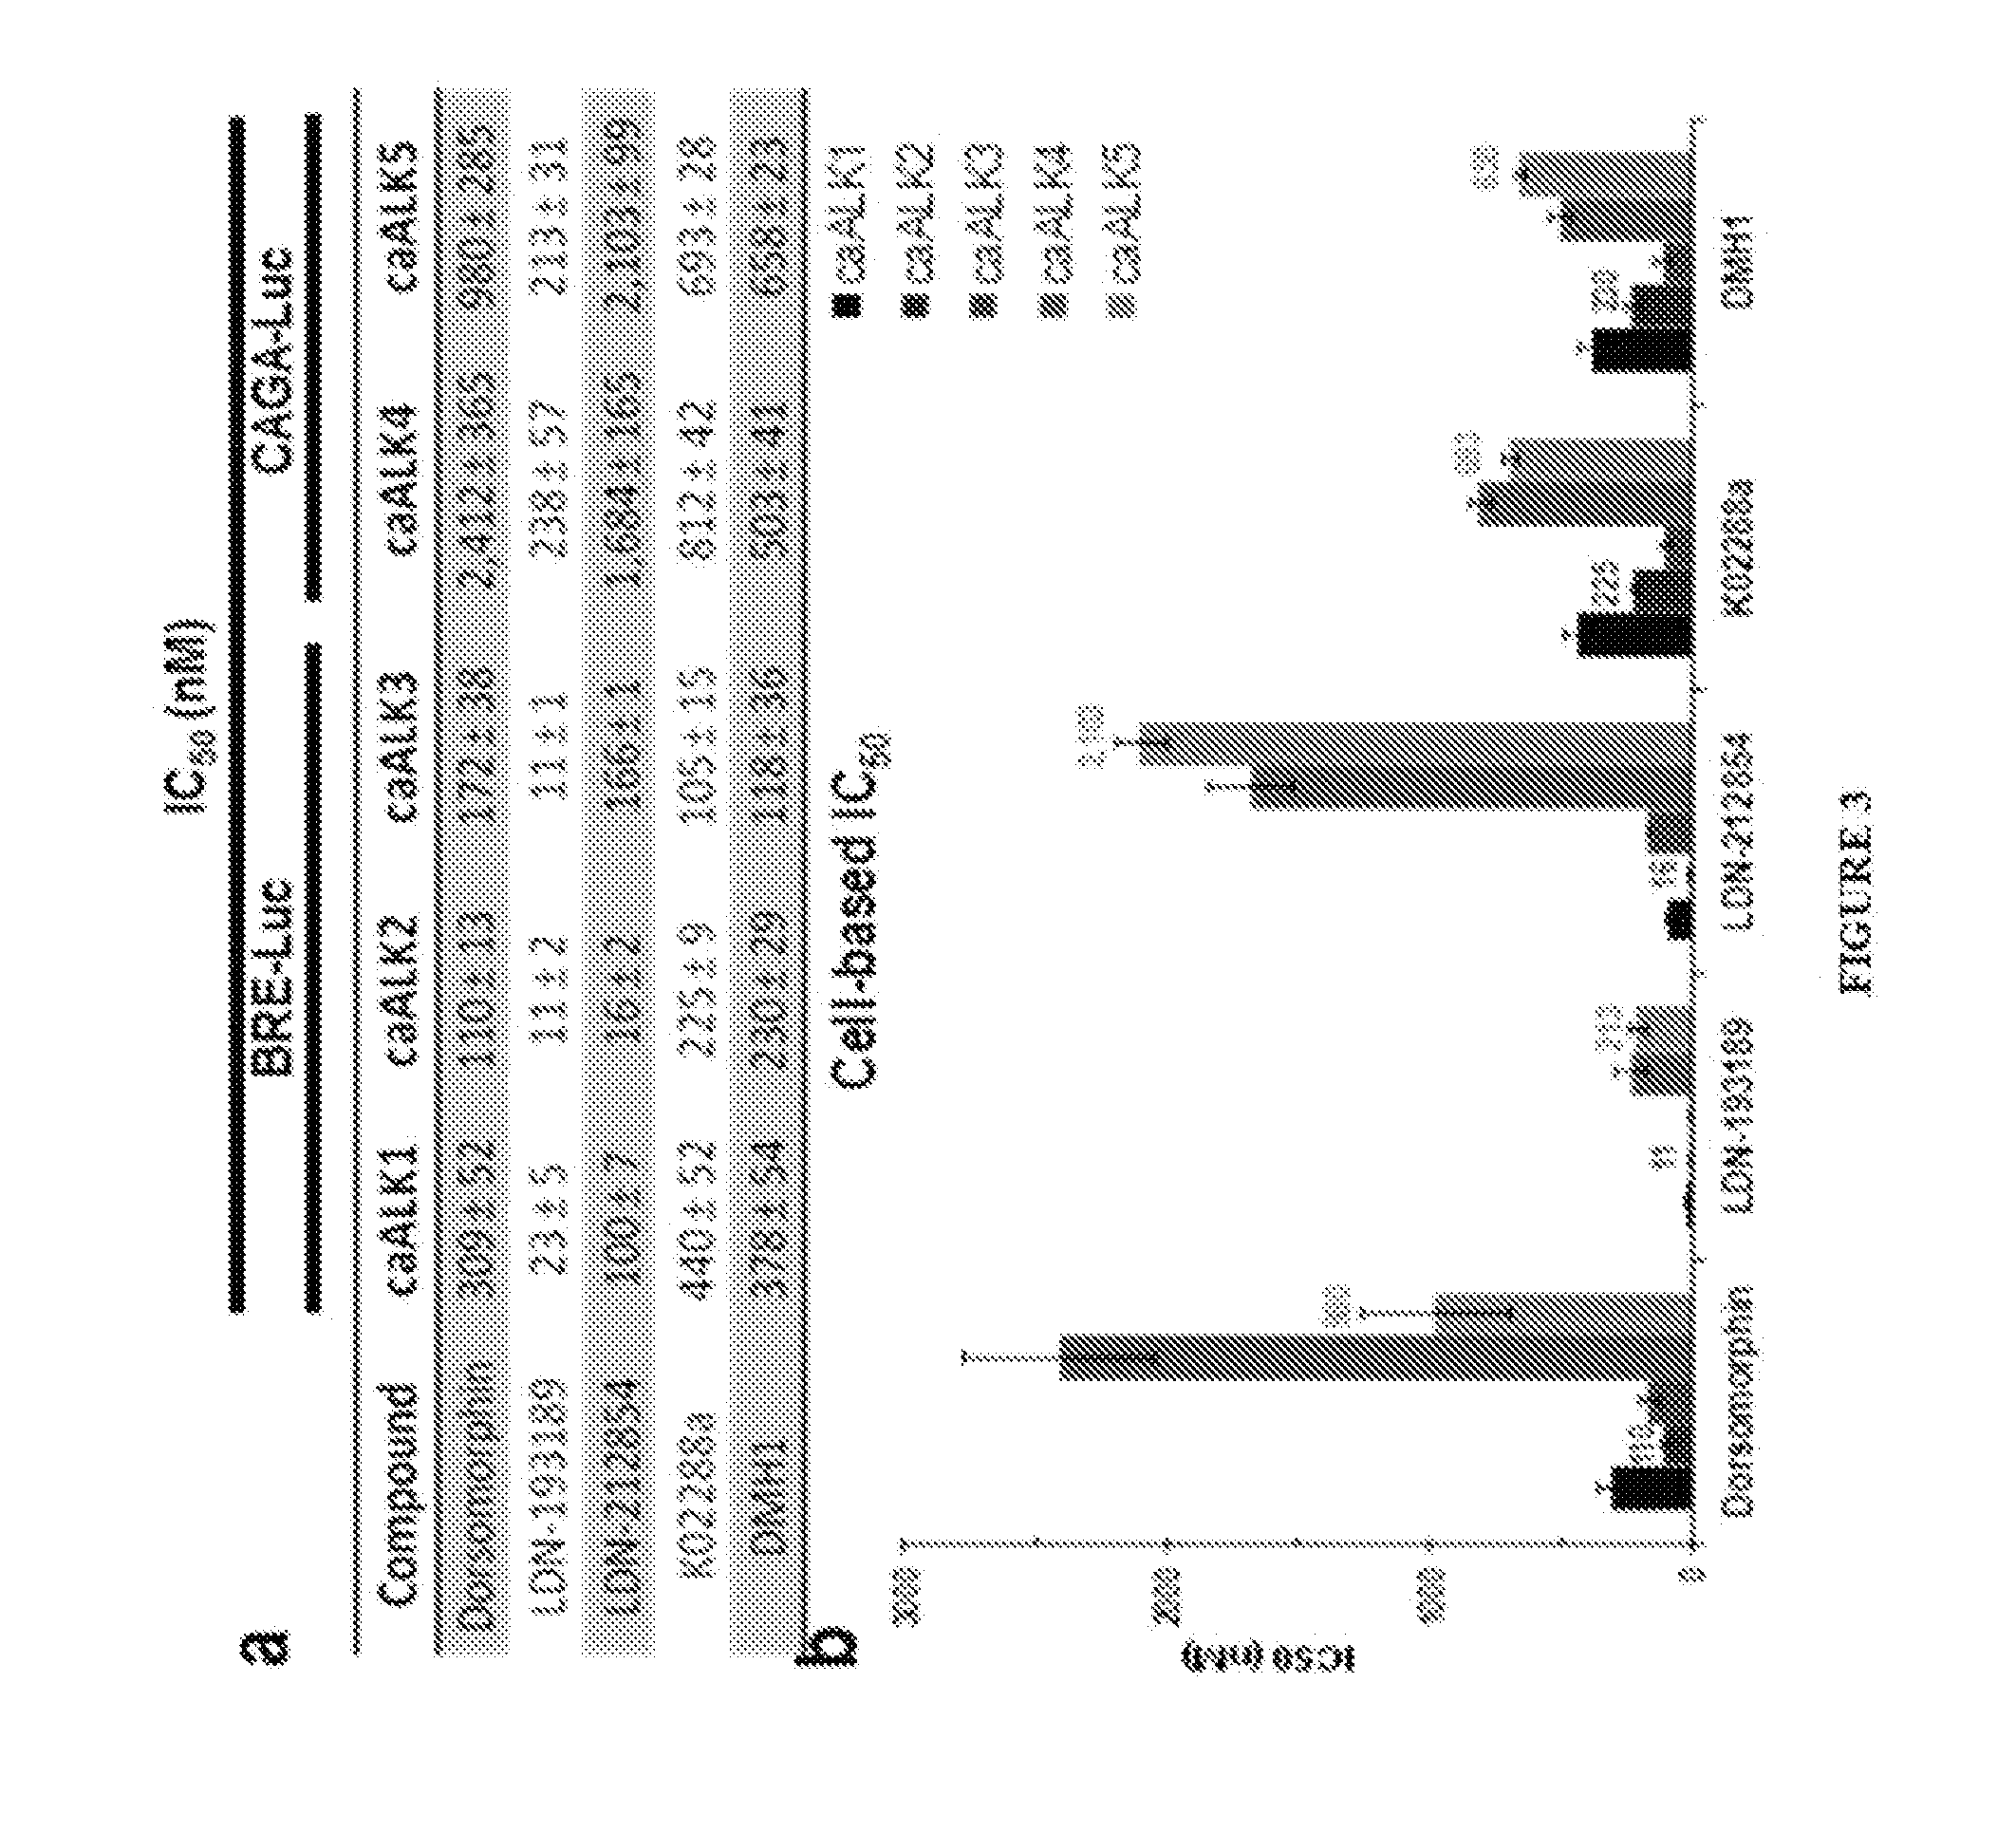 Bmp inhibitors and methods of use thereof